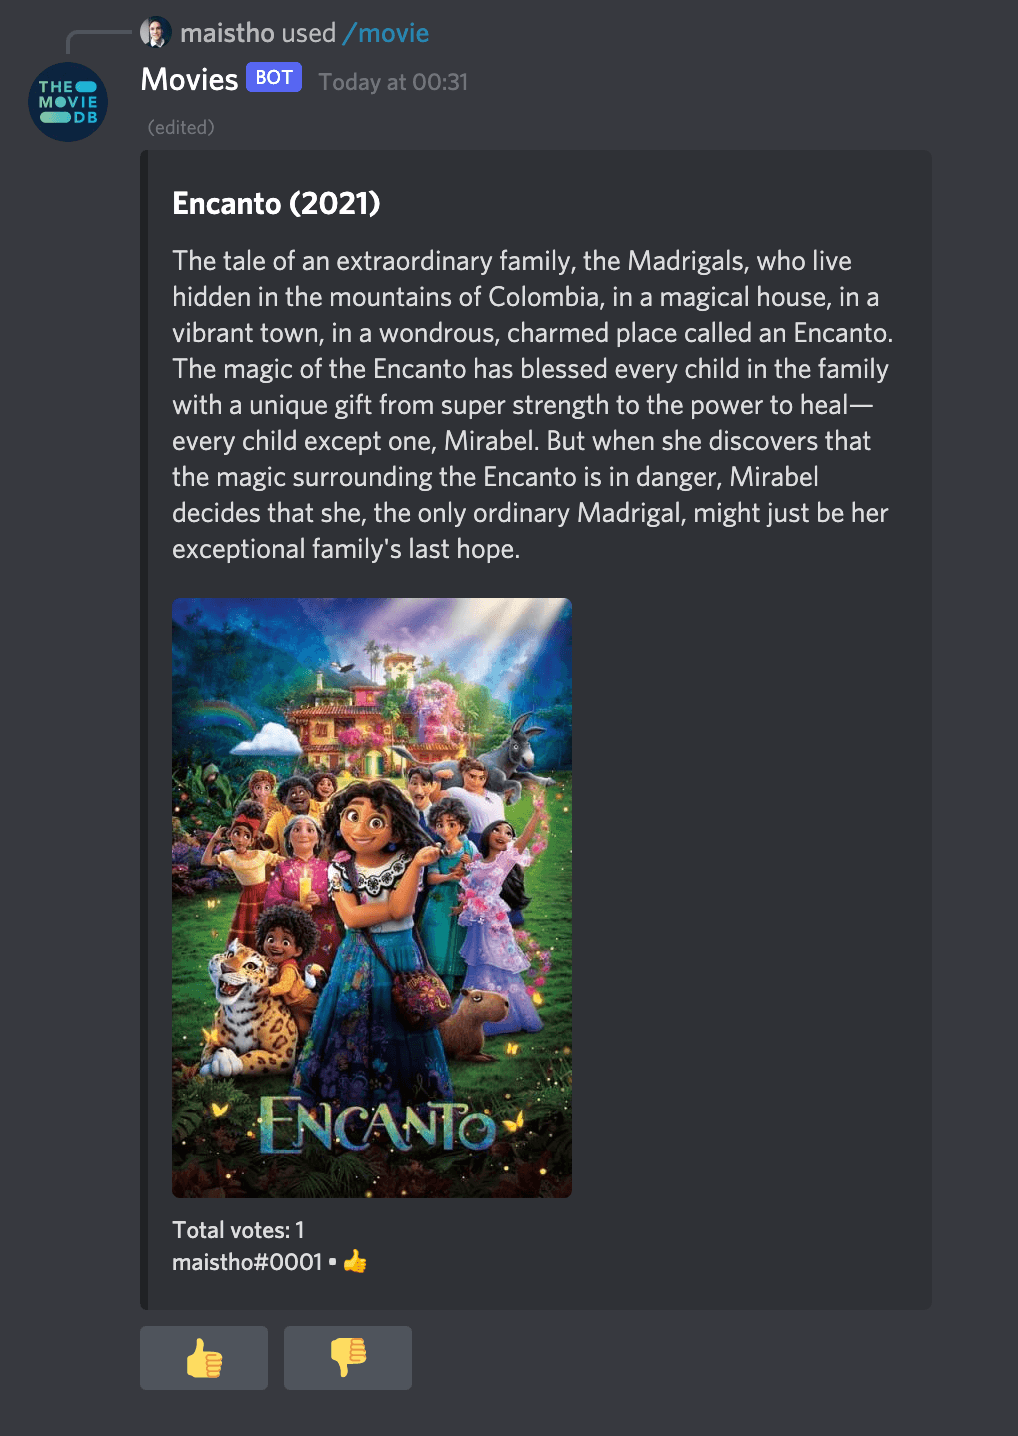 screenshot of the bot showing the movie Encanto (2021) and a single vote